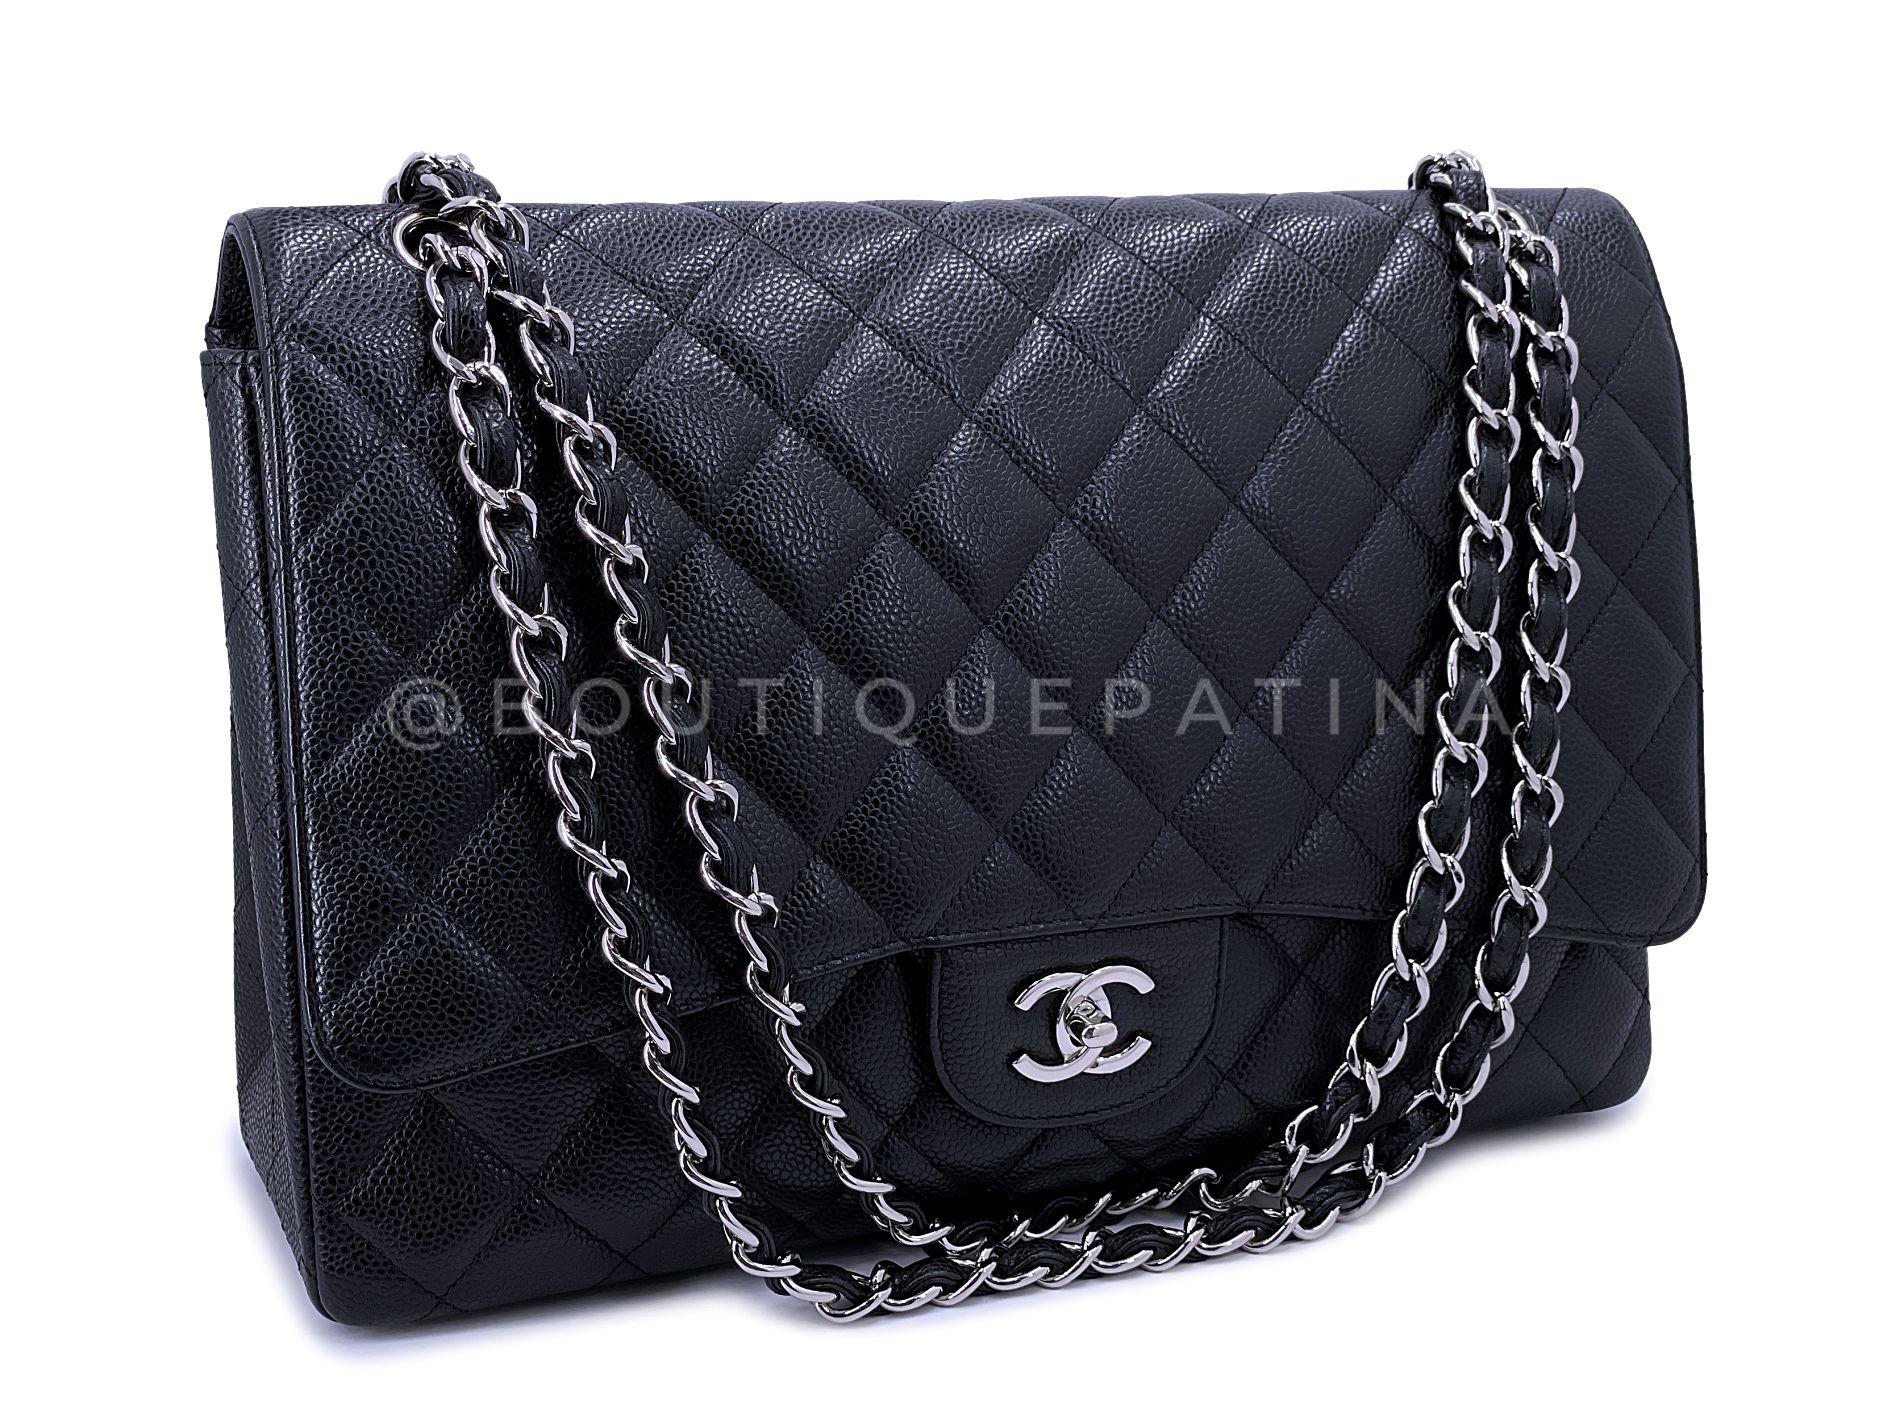 Store item: 66714
The iconic holy grail bag is the Chanel Classic Flap. Coveted for its simplicity and elegance - woven chain double strap that can be worn short or long, turnlock CC clasp, lambskin interior.

This is the single size classic flap,